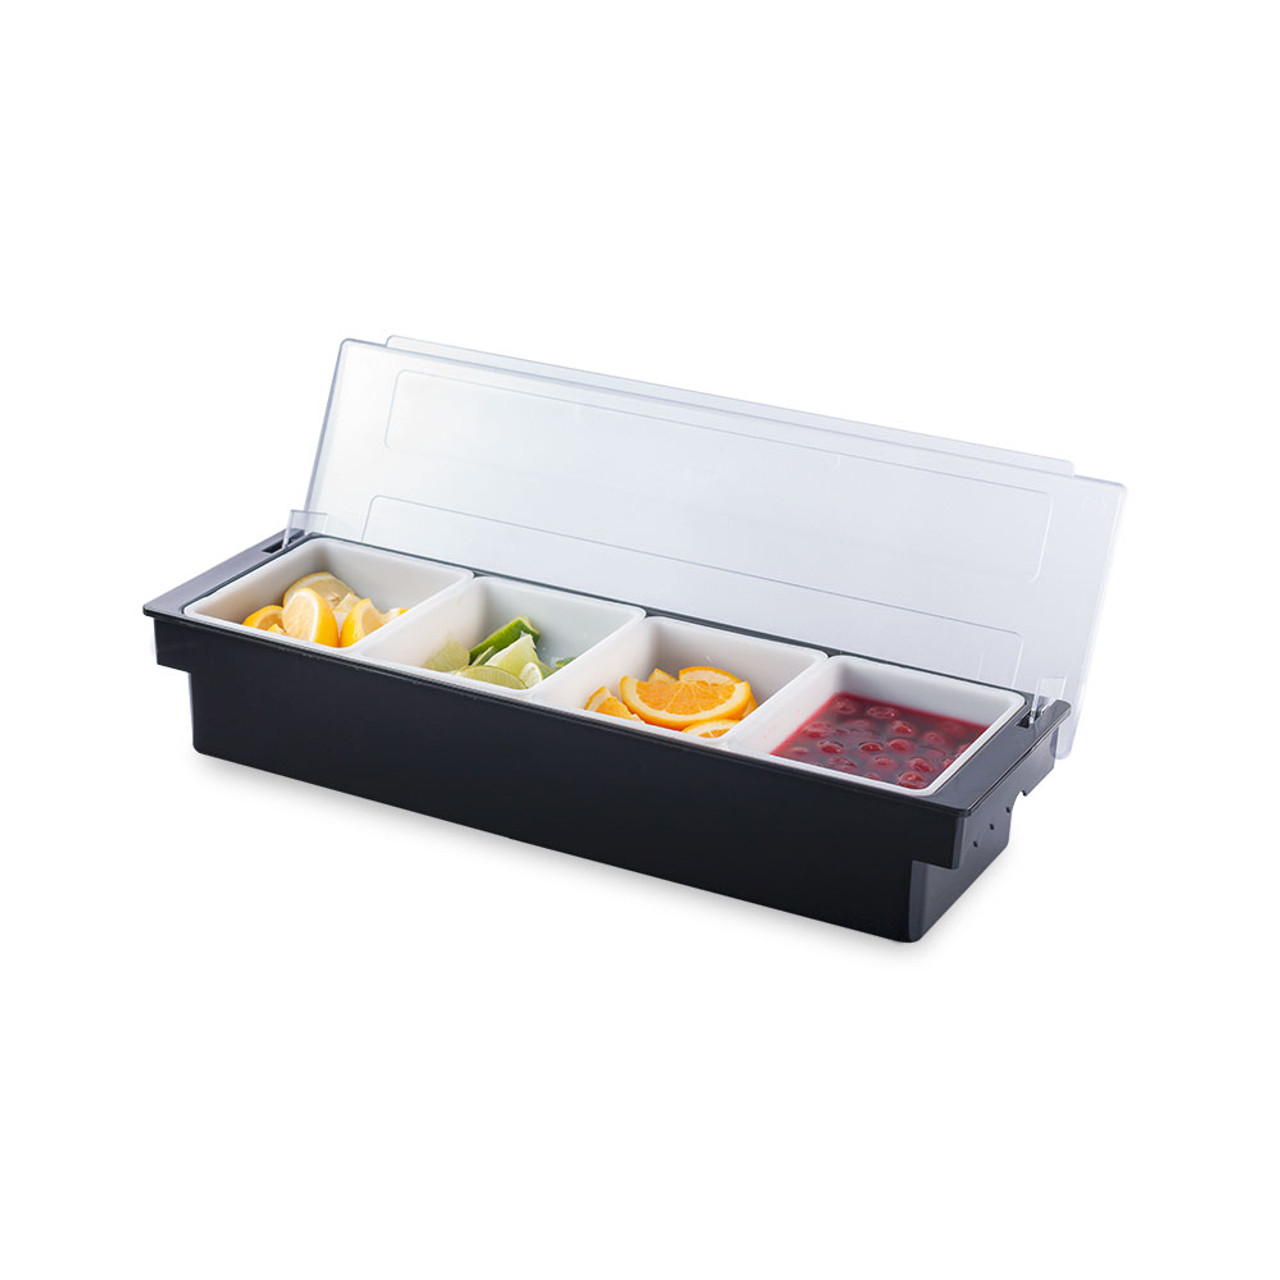 https://cdn11.bigcommerce.com/s-cznxq08r7/images/stencil/1280x1280/products/1506/4966/cch-4-bar-garnish-tray-with-lid-plastic-4-compartments-2__49162.1590769624.jpg?c=1